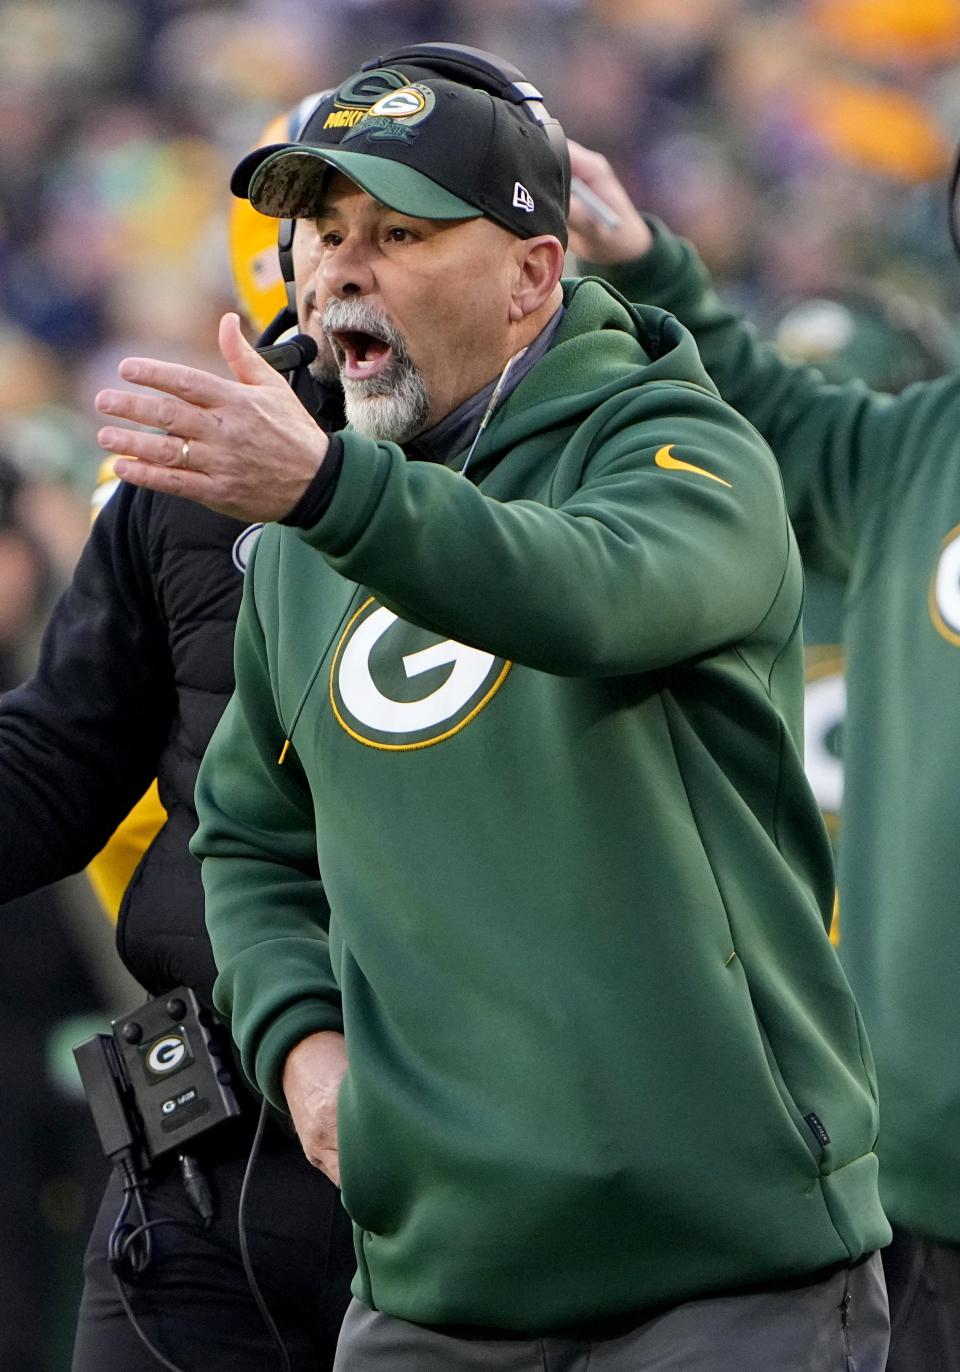 Green Bay Packers special teams coordinator Rich Bisaccia has emerged as a candidate for the Indianapolis Colts' head coaching job due to his two decades of NFL experience and 7-5 interim stint that got the Las Vegas Raiders to the playoffs in 2021.